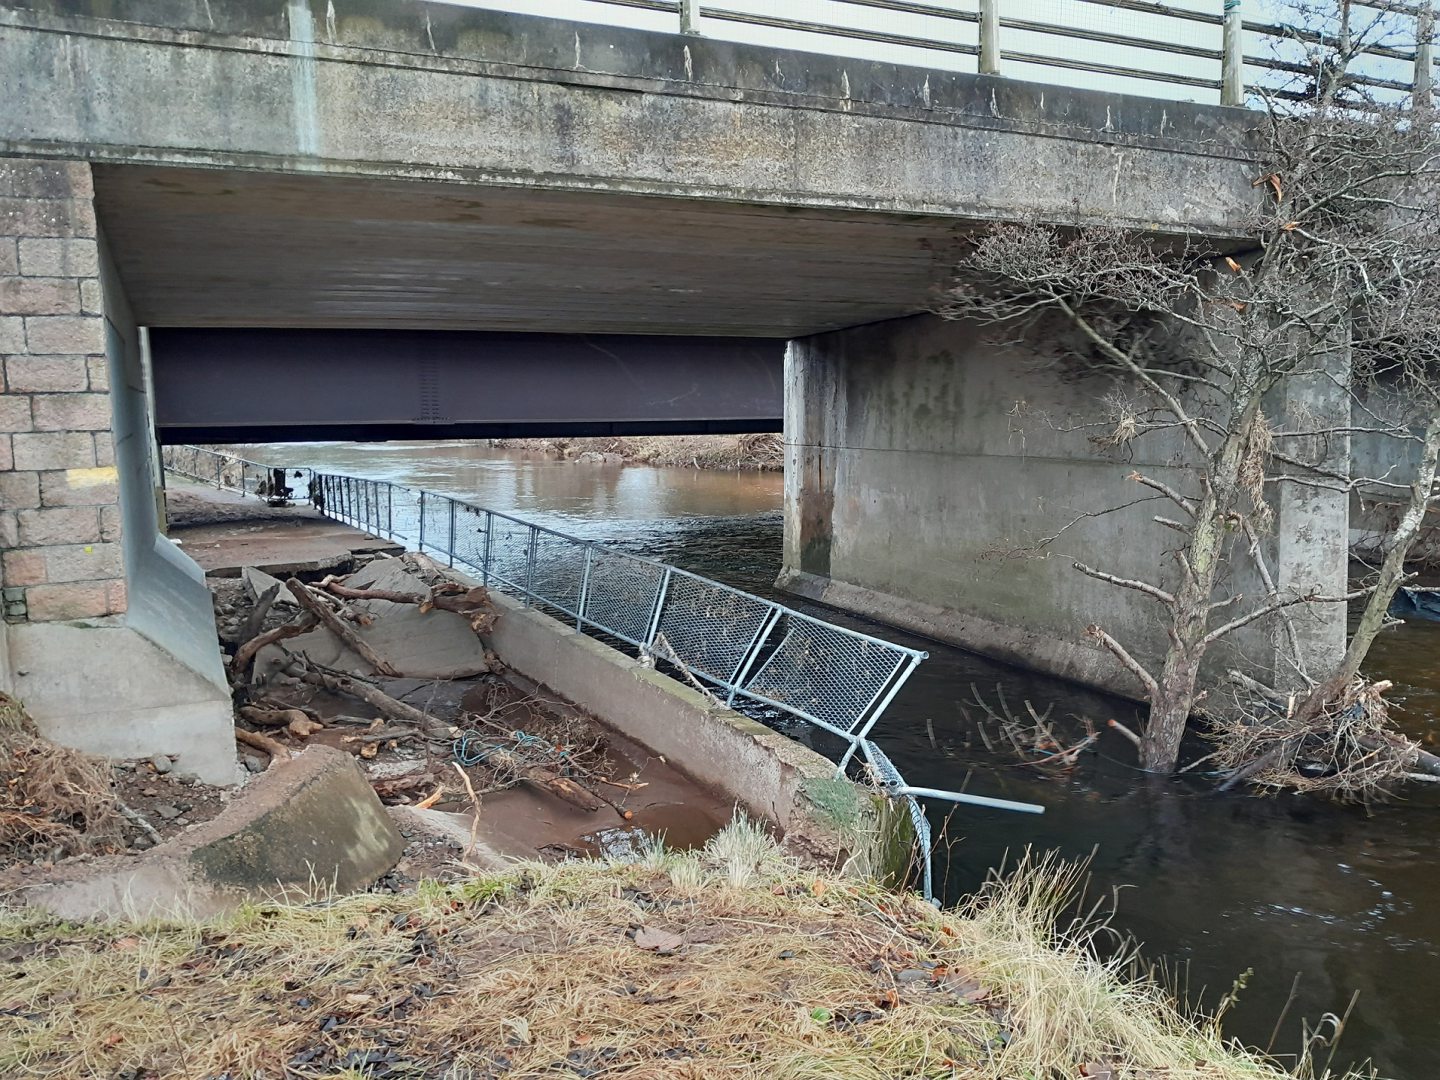 Damage to the bridge's walkway due to the high river levels.